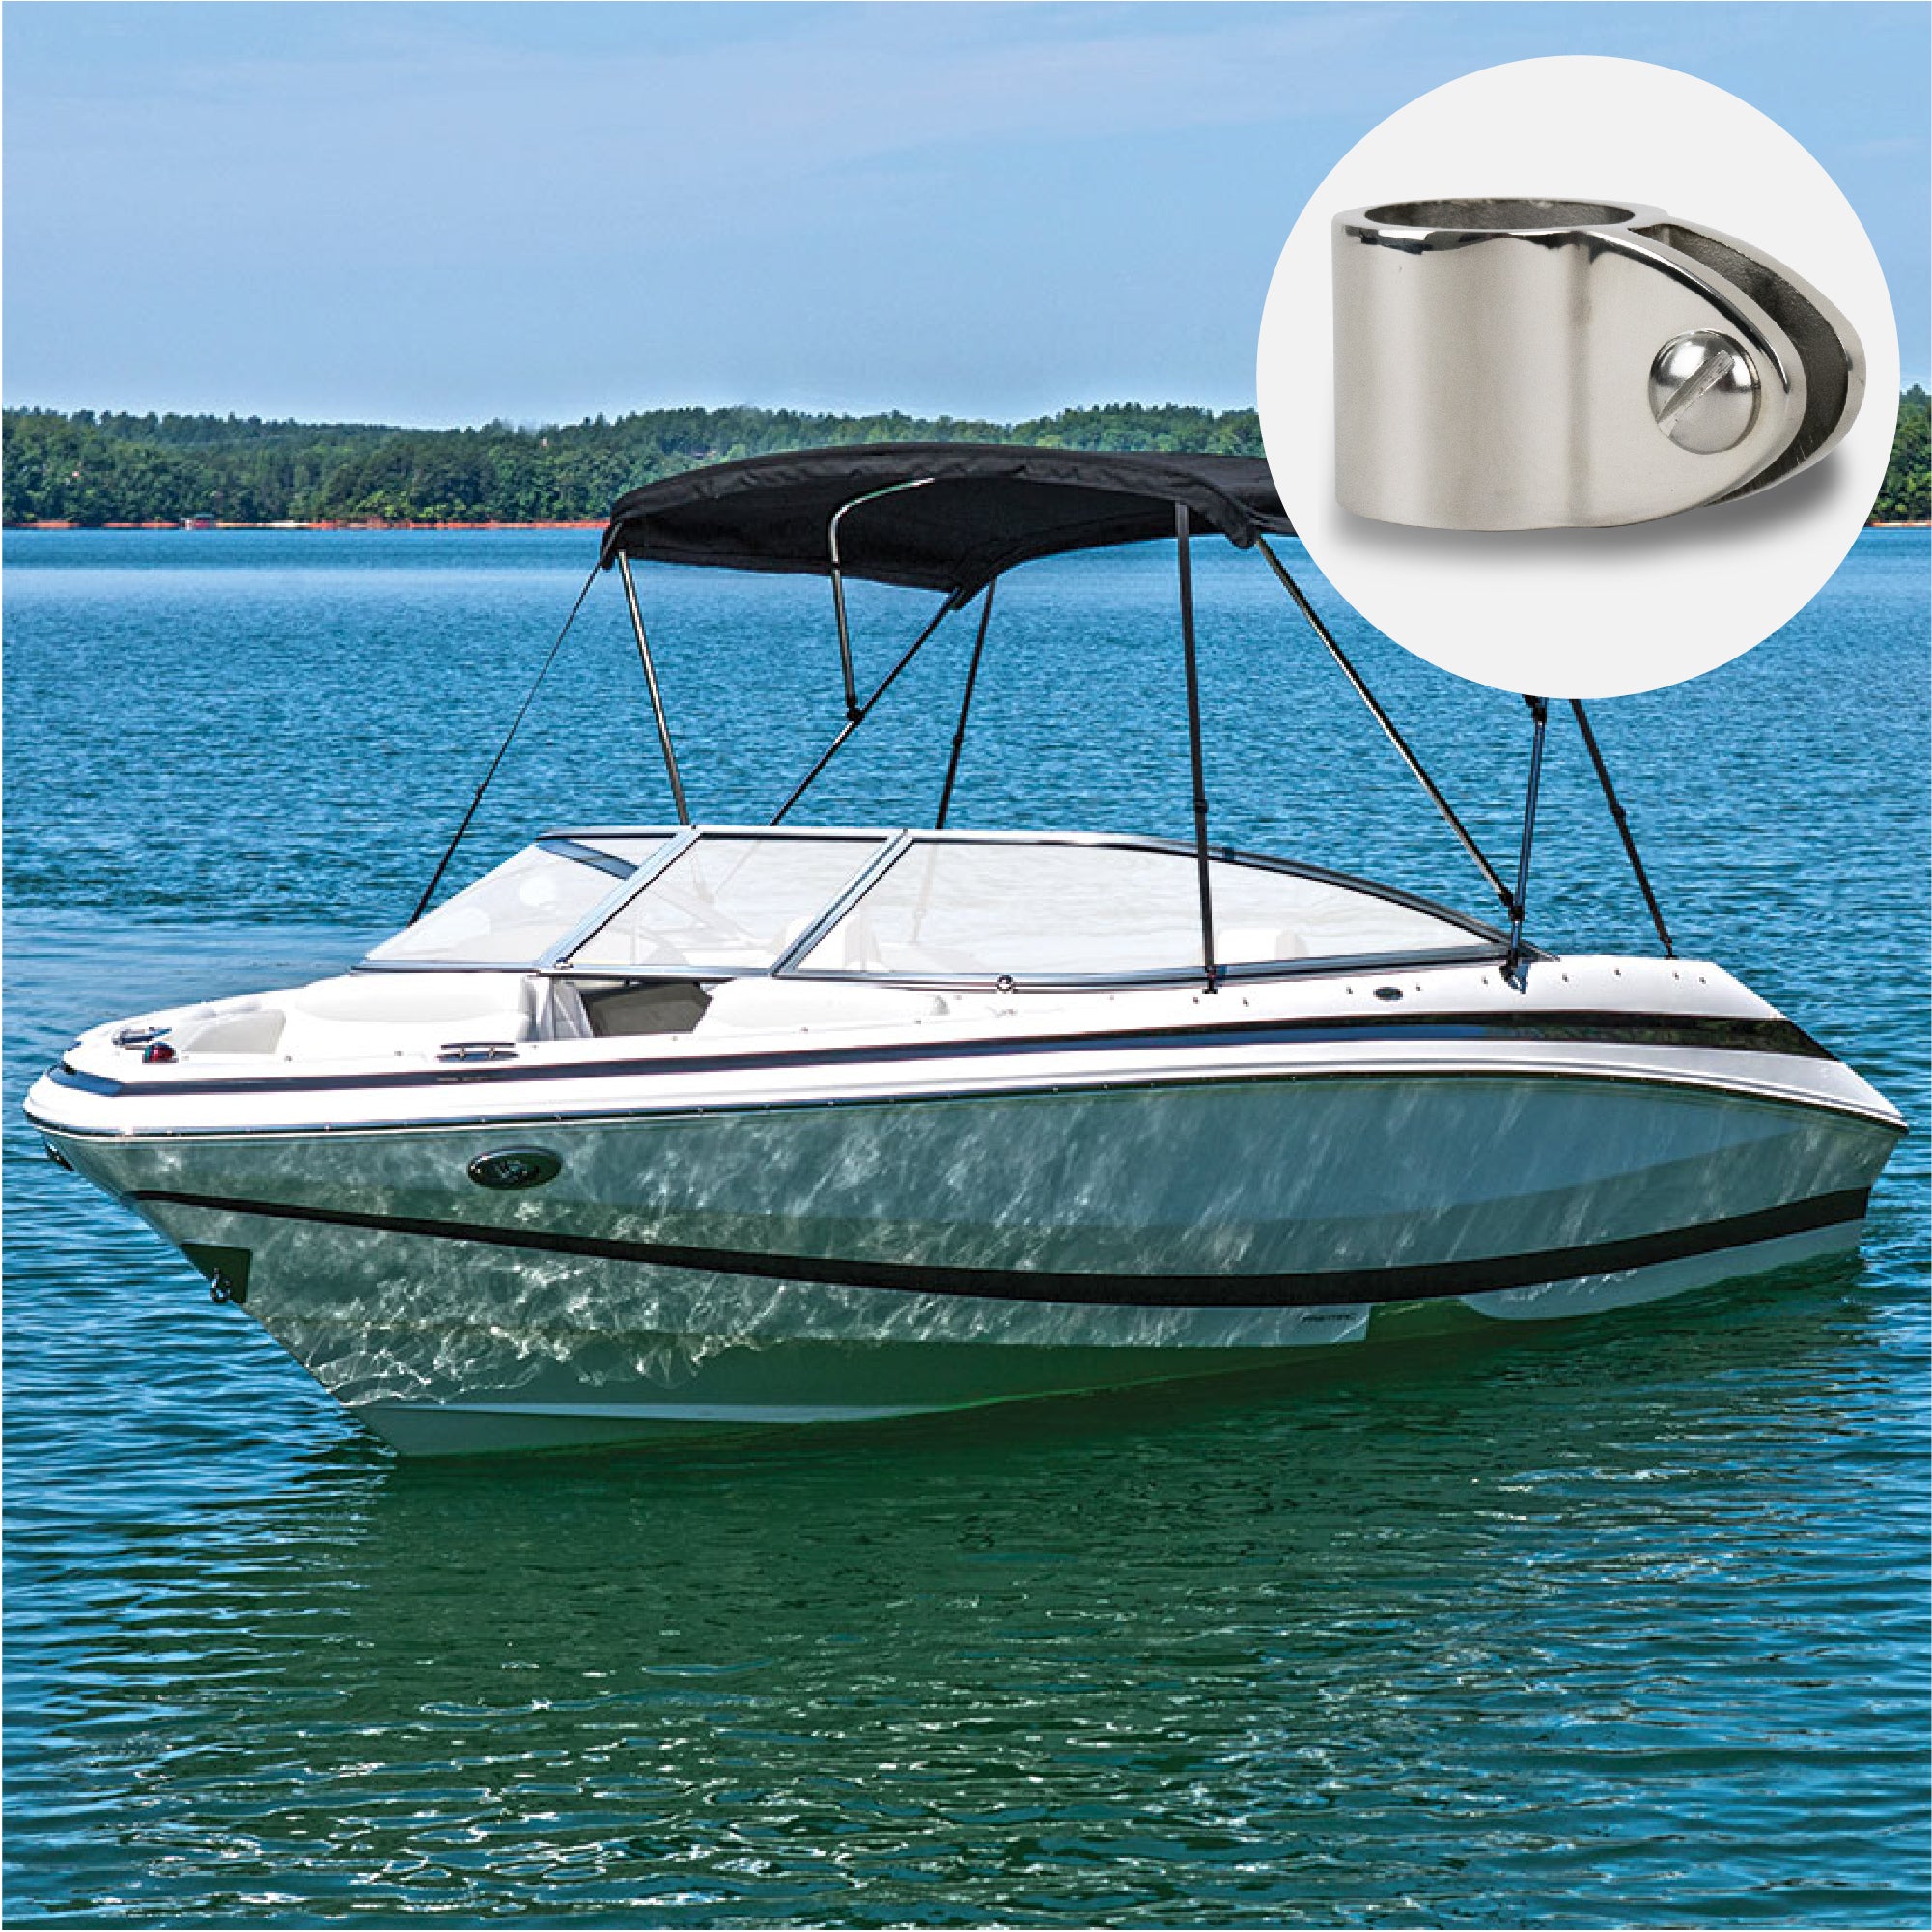 Bimini Top Jaw Slide 1", Stainless Steel, 2-Pack - FO2959-M2